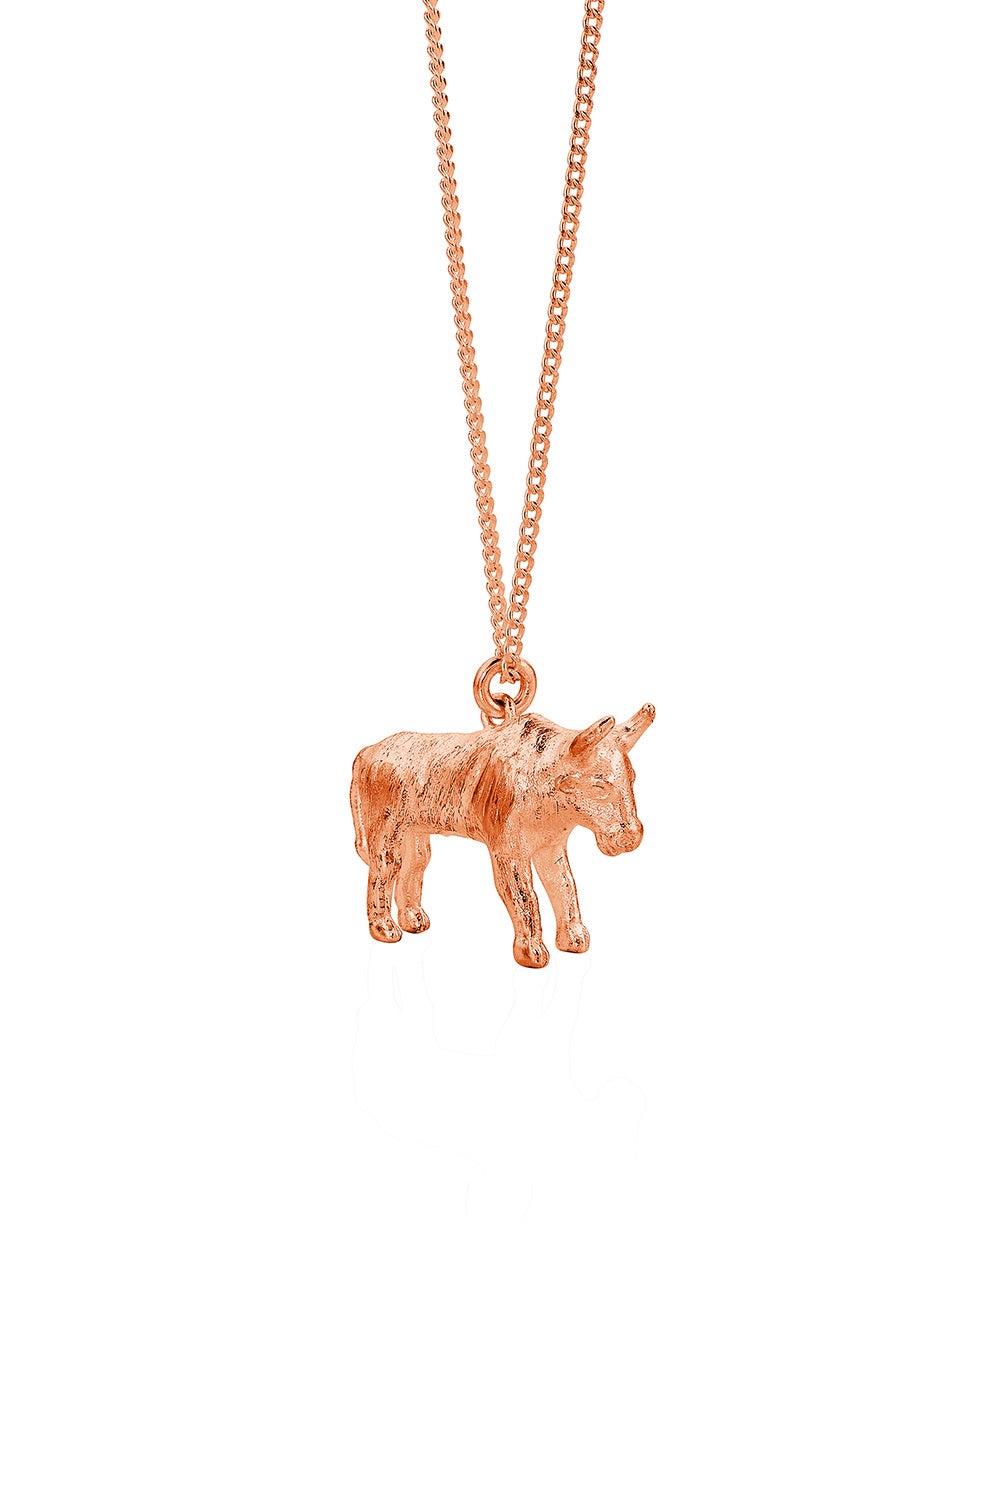 Ox Necklace Rose Gold